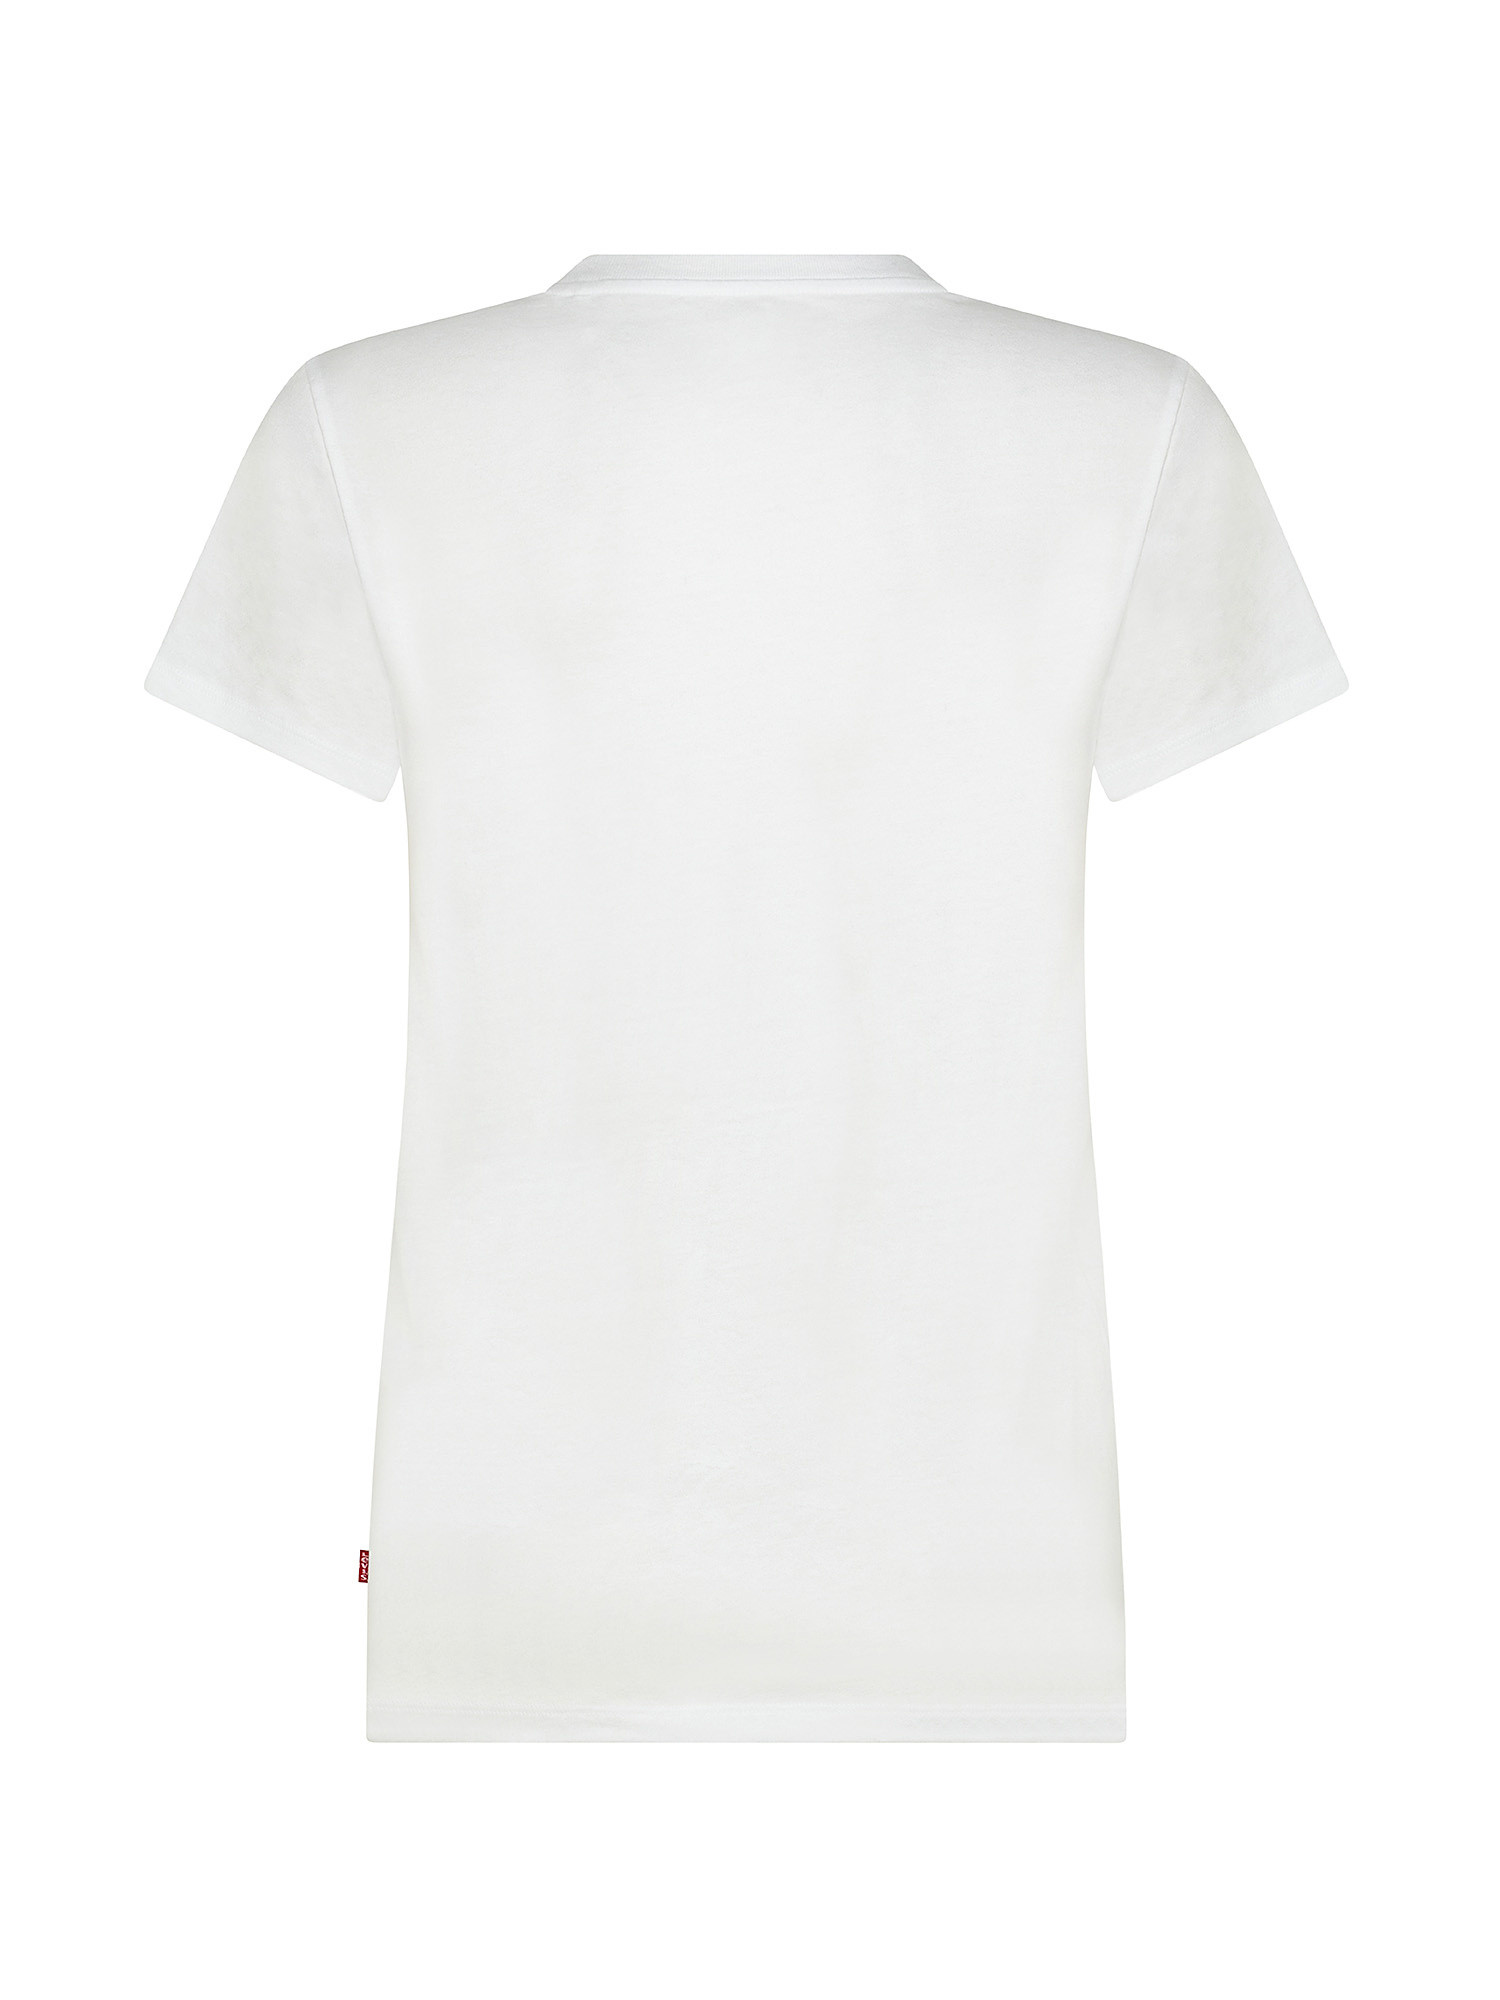 Perfect Tee T-shirt, White, large image number 1